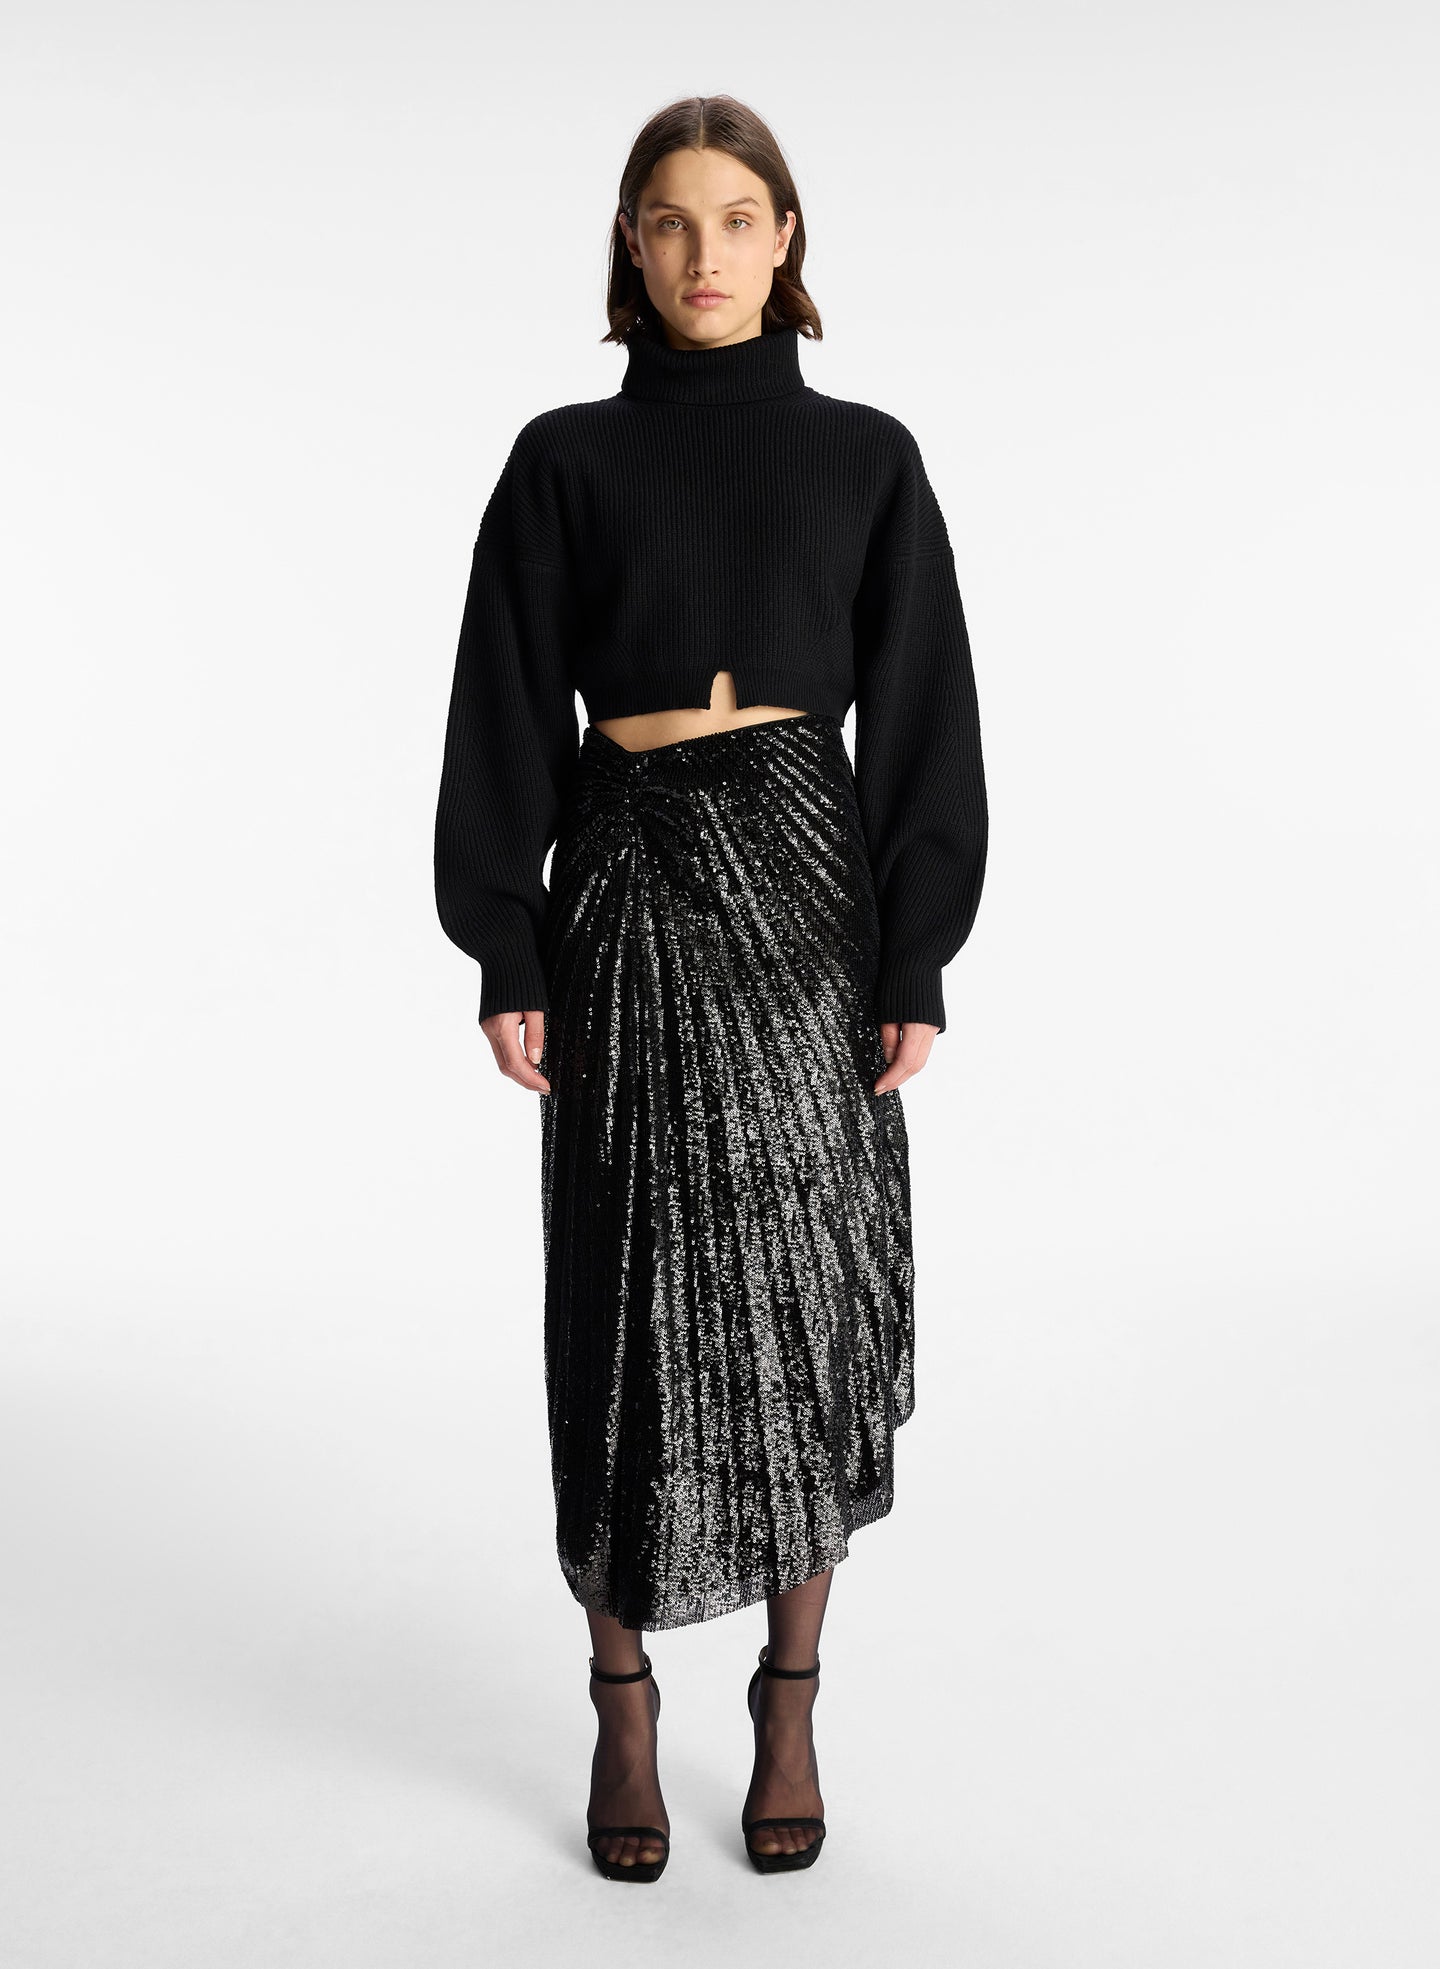 front view of woman wearing black long sleeve turtleneck wool sweater in cropped length with small split in the front hemline 